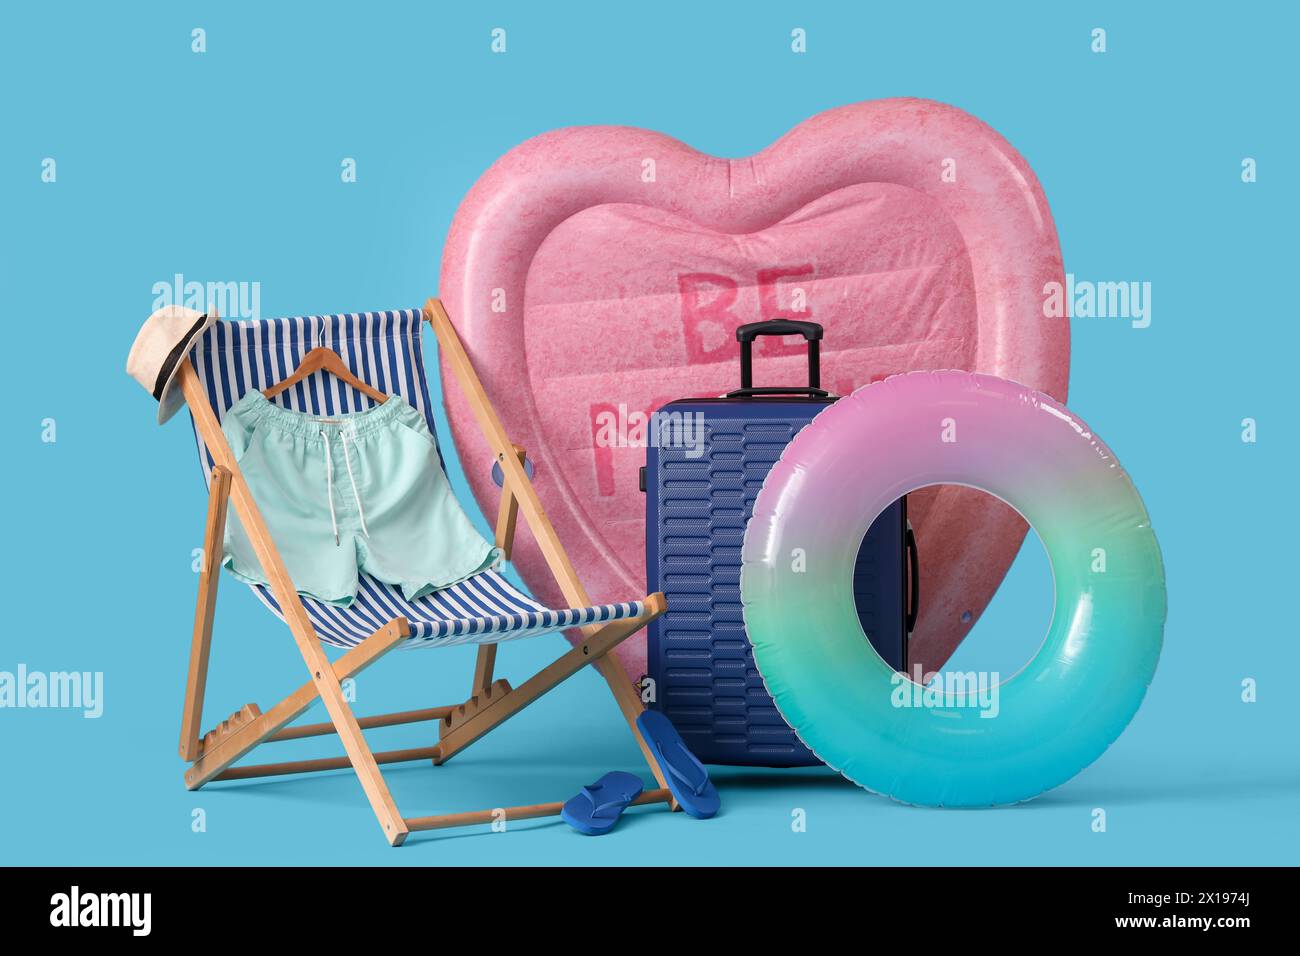 Swimming mattress in shape of heart, inflatable ring and suitcase on blue background Stock Photo